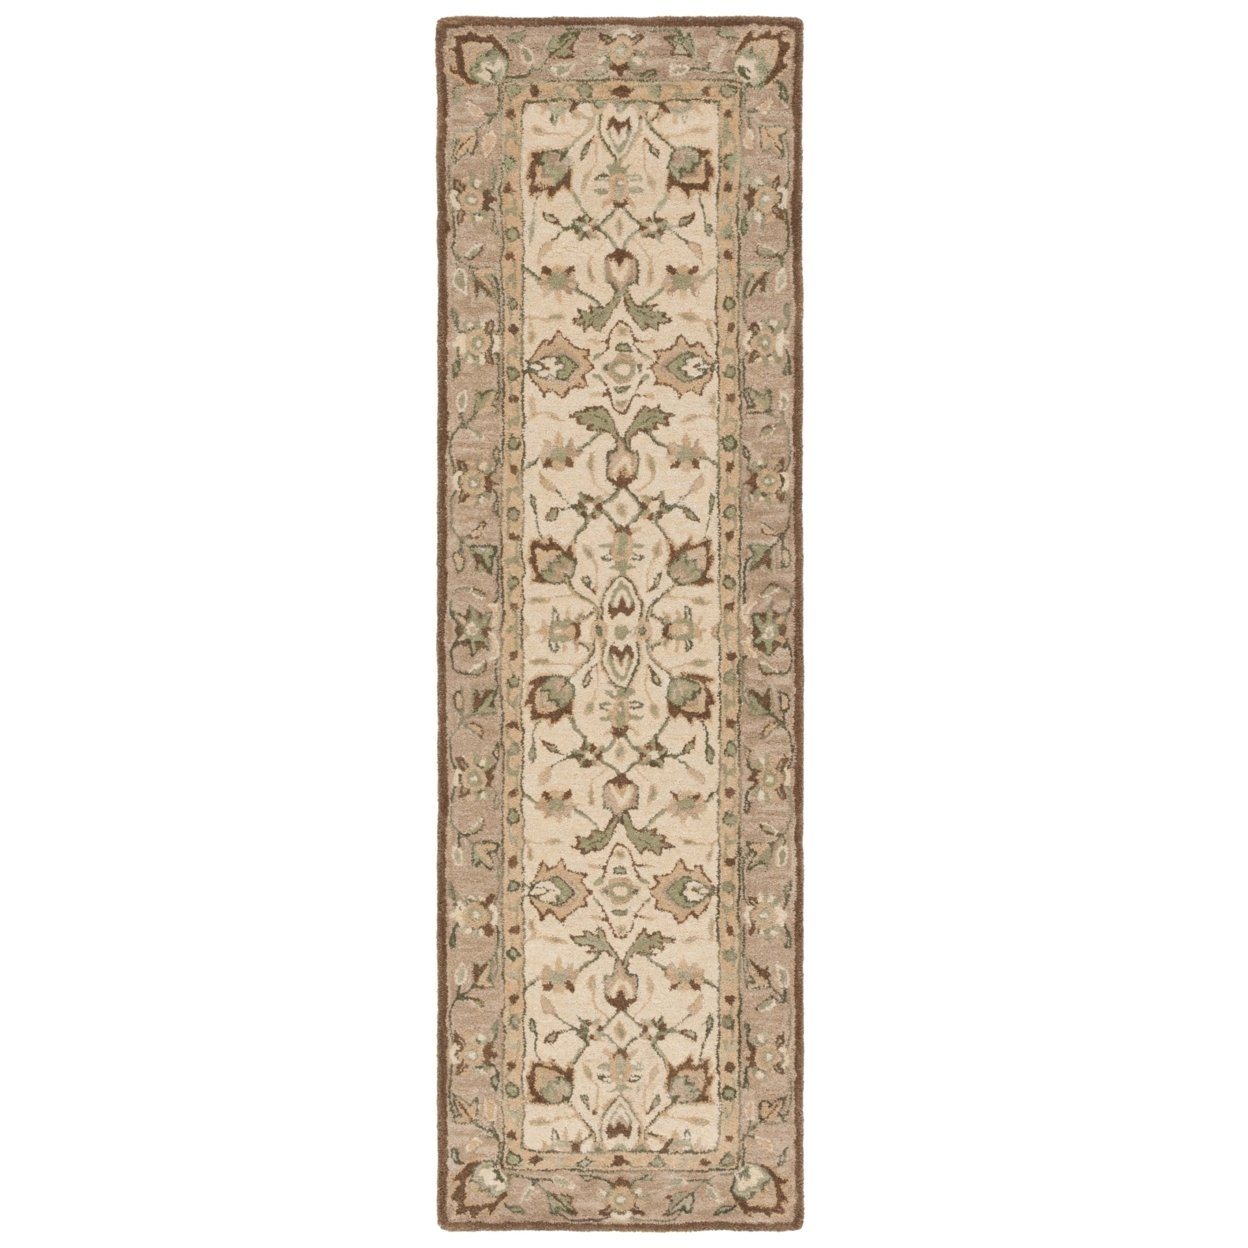 Safavieh AT65B Antiquity Ivory / Beige - Ivory / Grey, 2' X 3' Accent